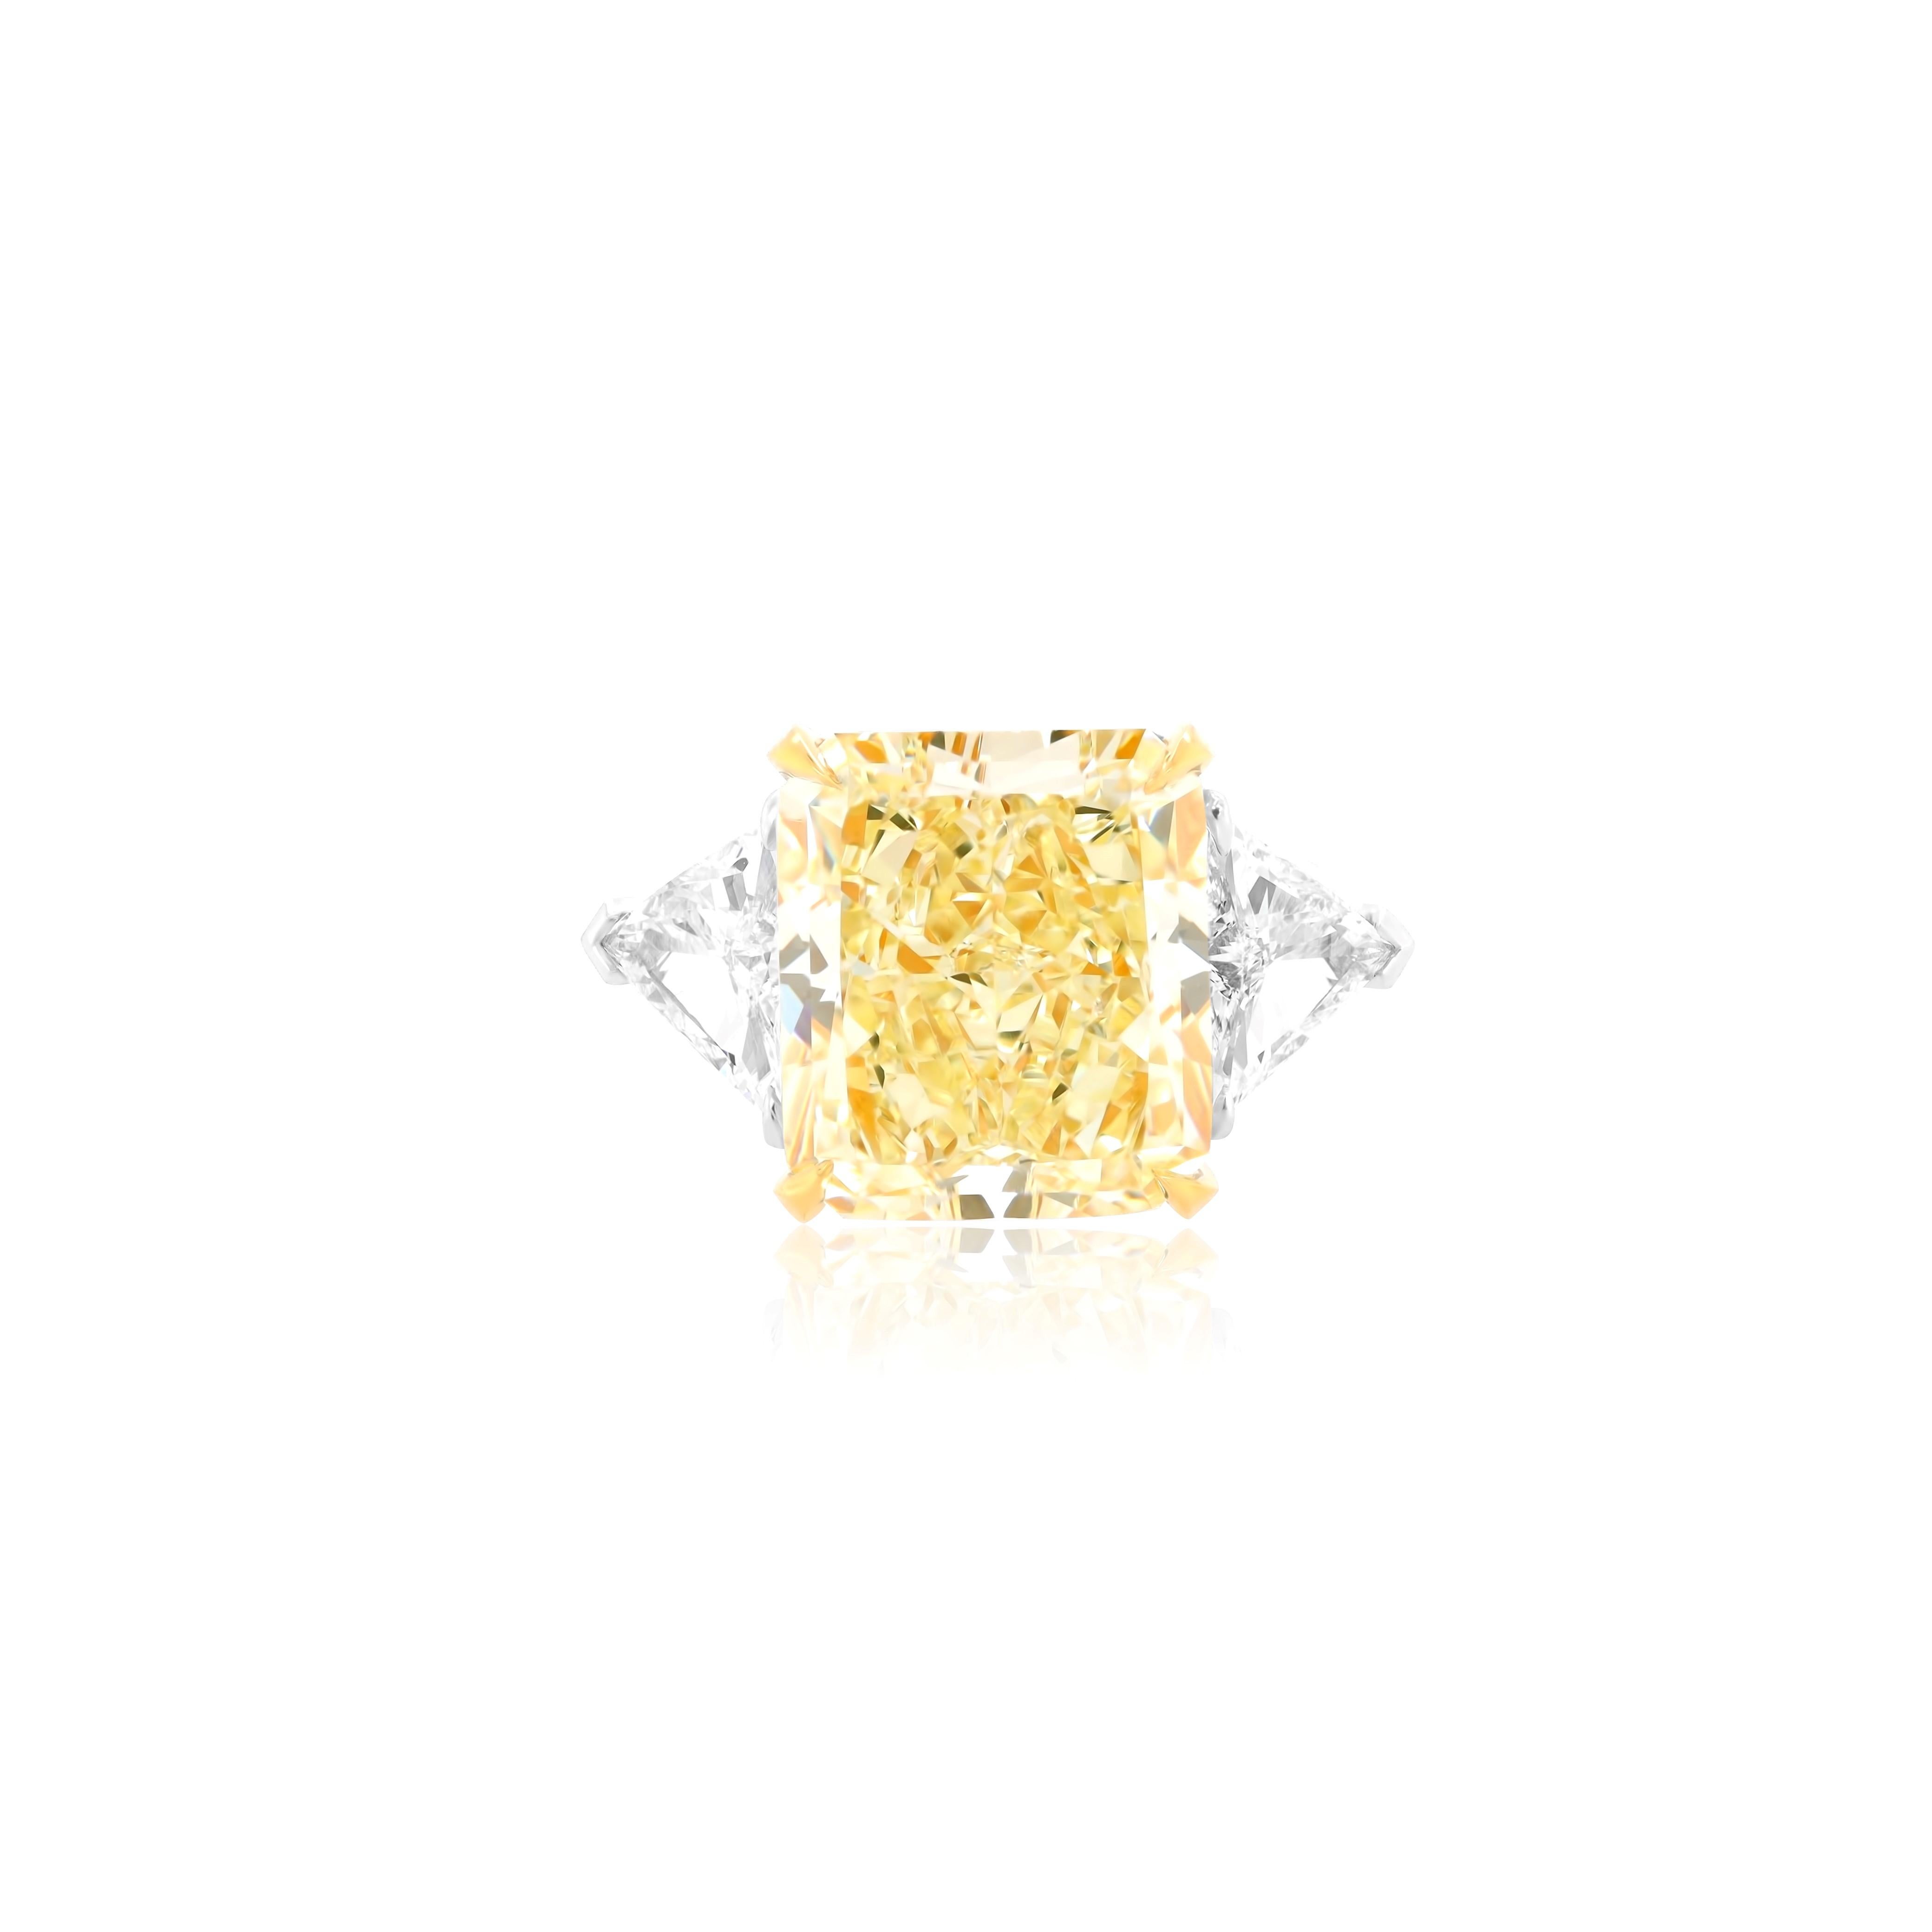 Modern DIANA M. Platinum and 18 kt yellow gold engagement ring  12.14CT FY VS2 For Sale